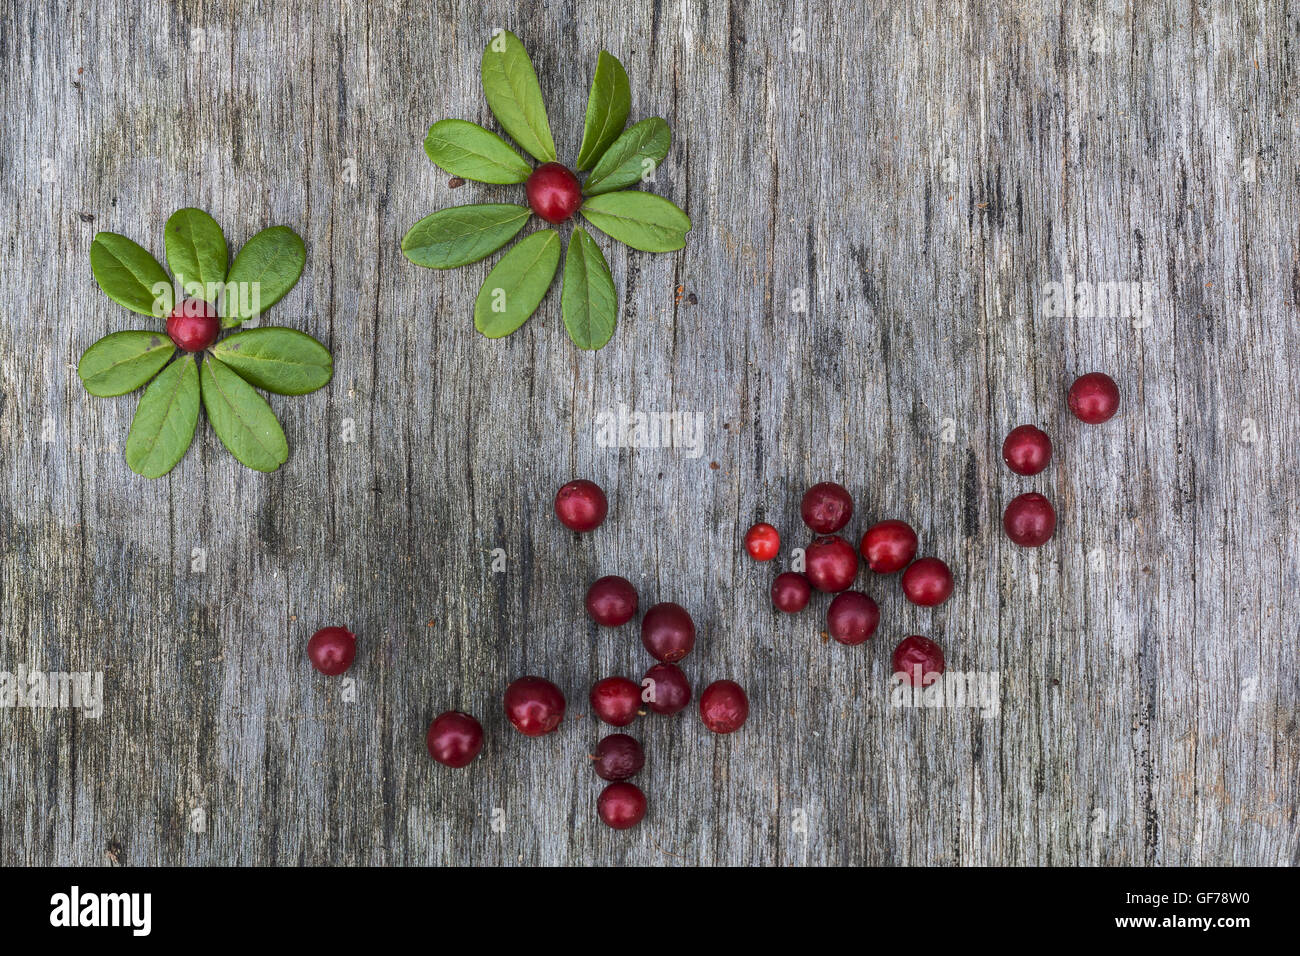 Fresh ripe cranberries with leaves lying on the old vintage wooden table. Background for nature themes. Horizontal overhead view. Stock Photo